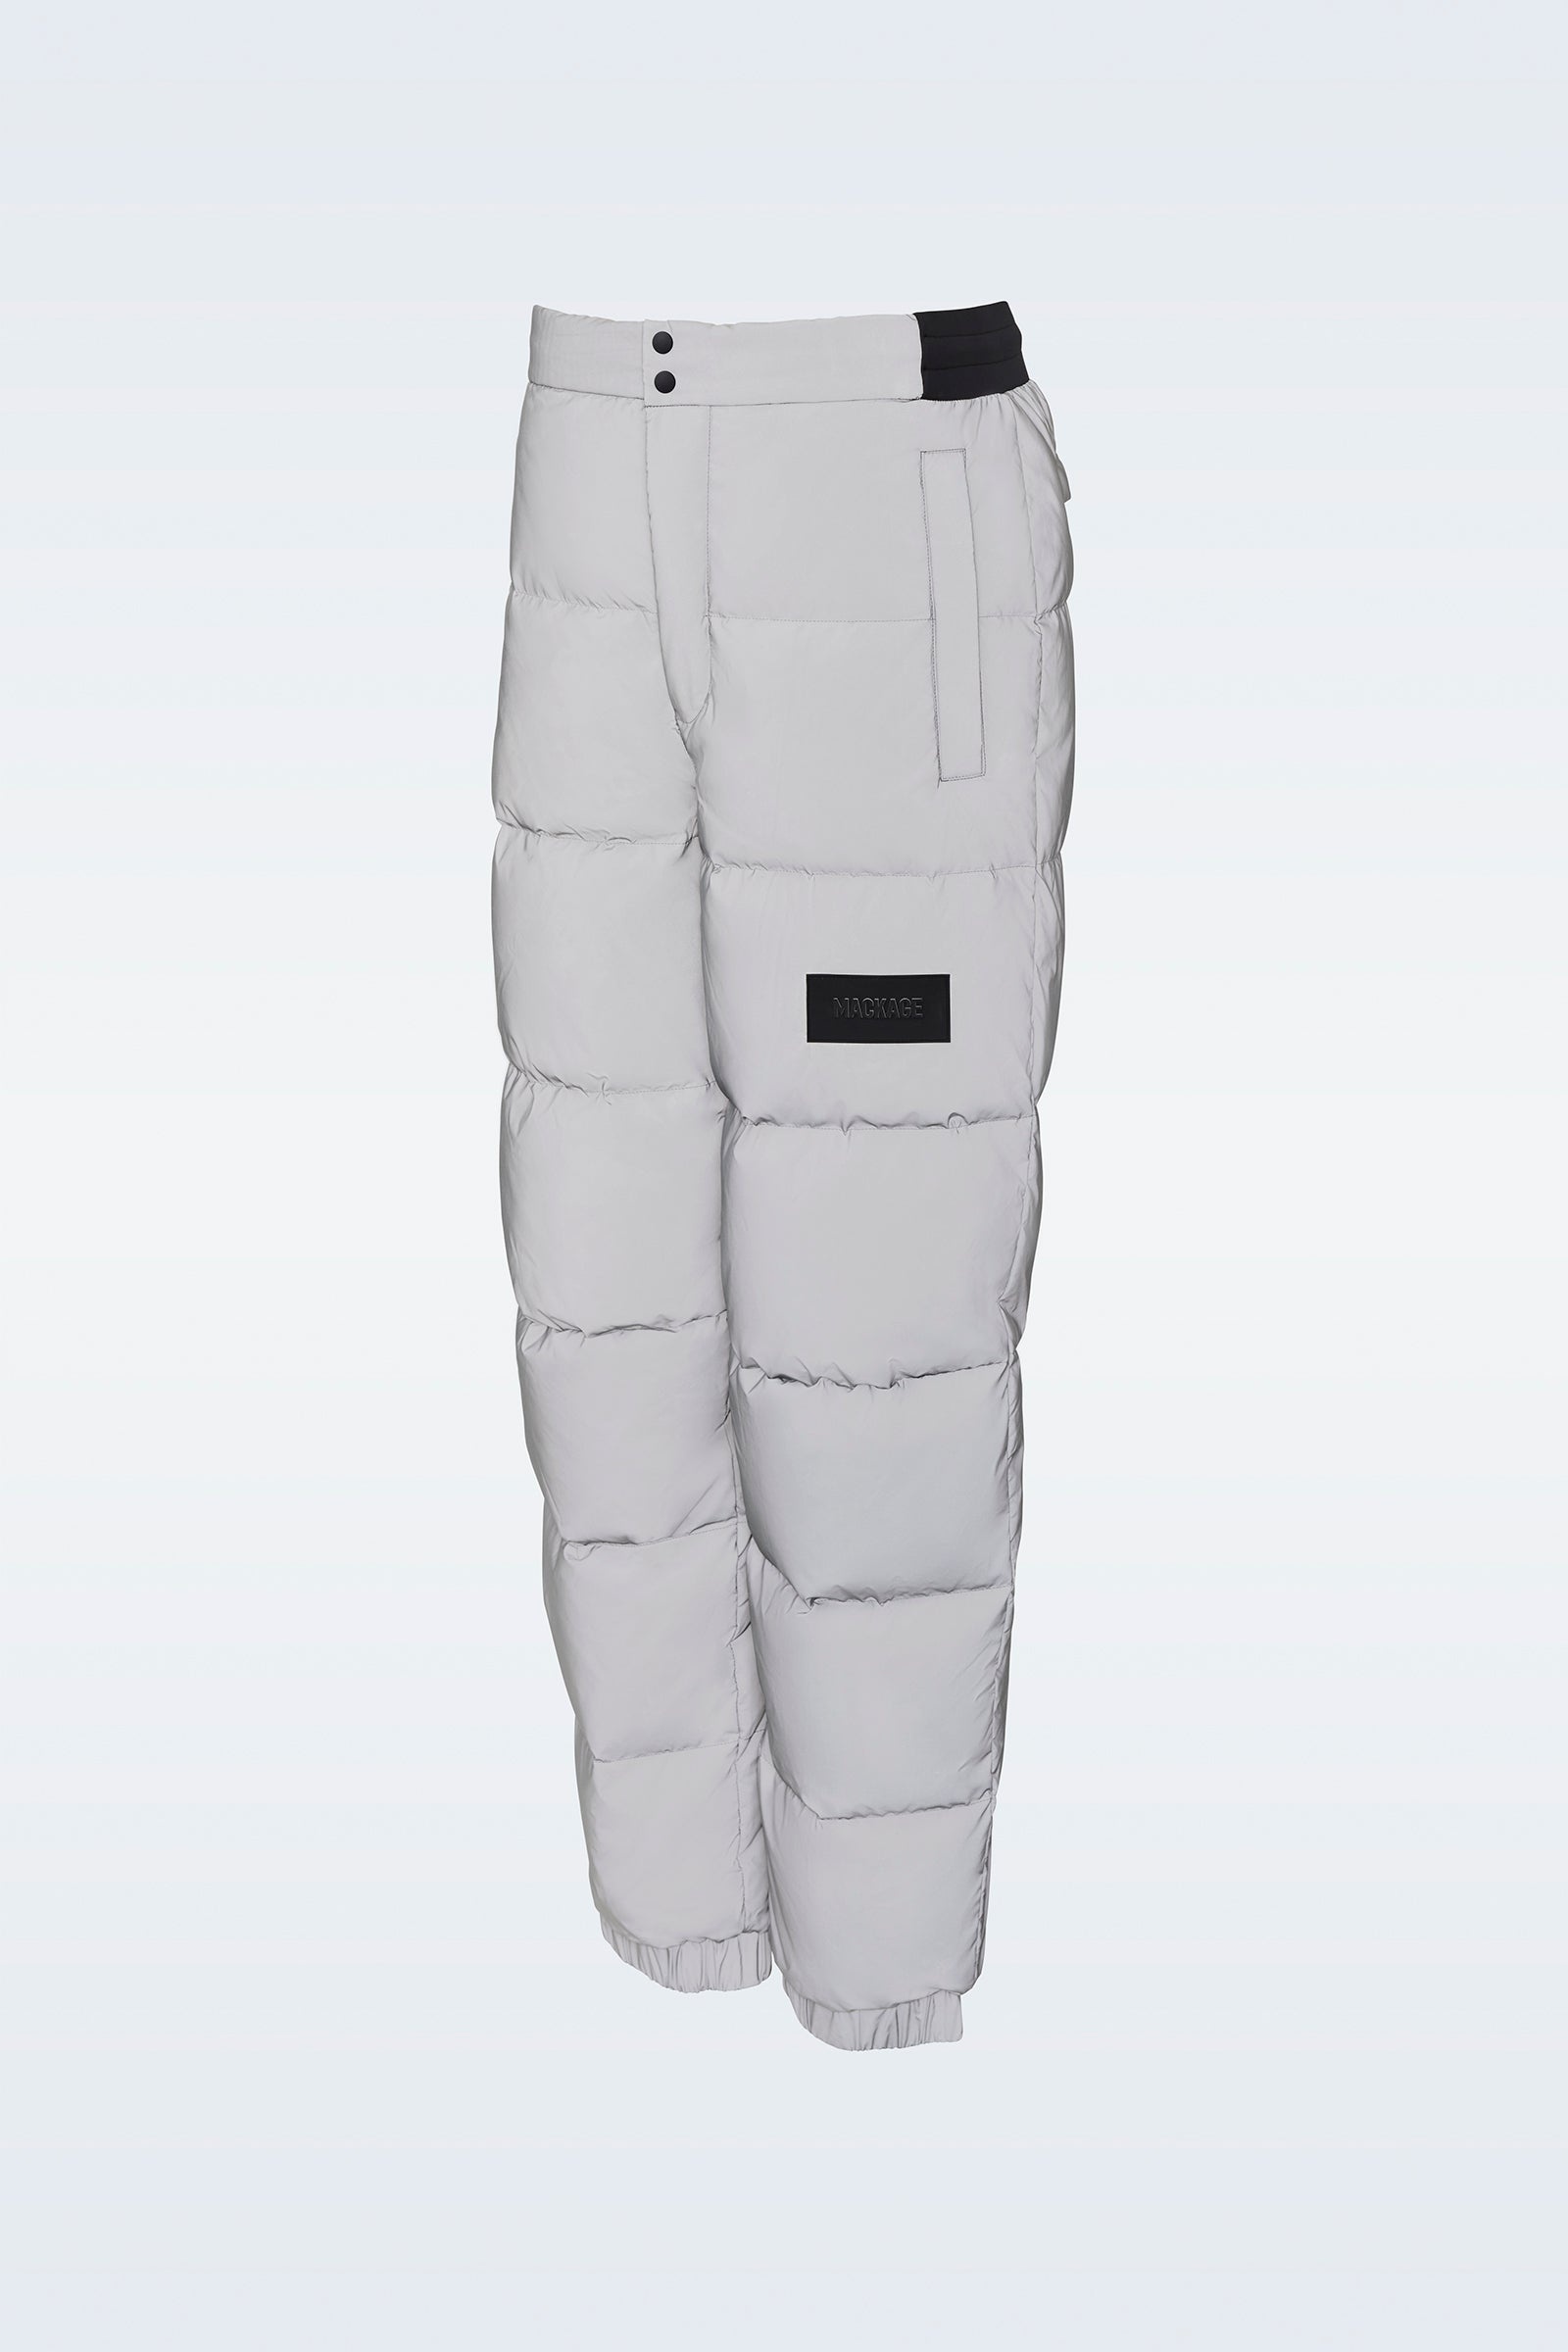 NELSON-RF Reflective down quilted ski pants - 1